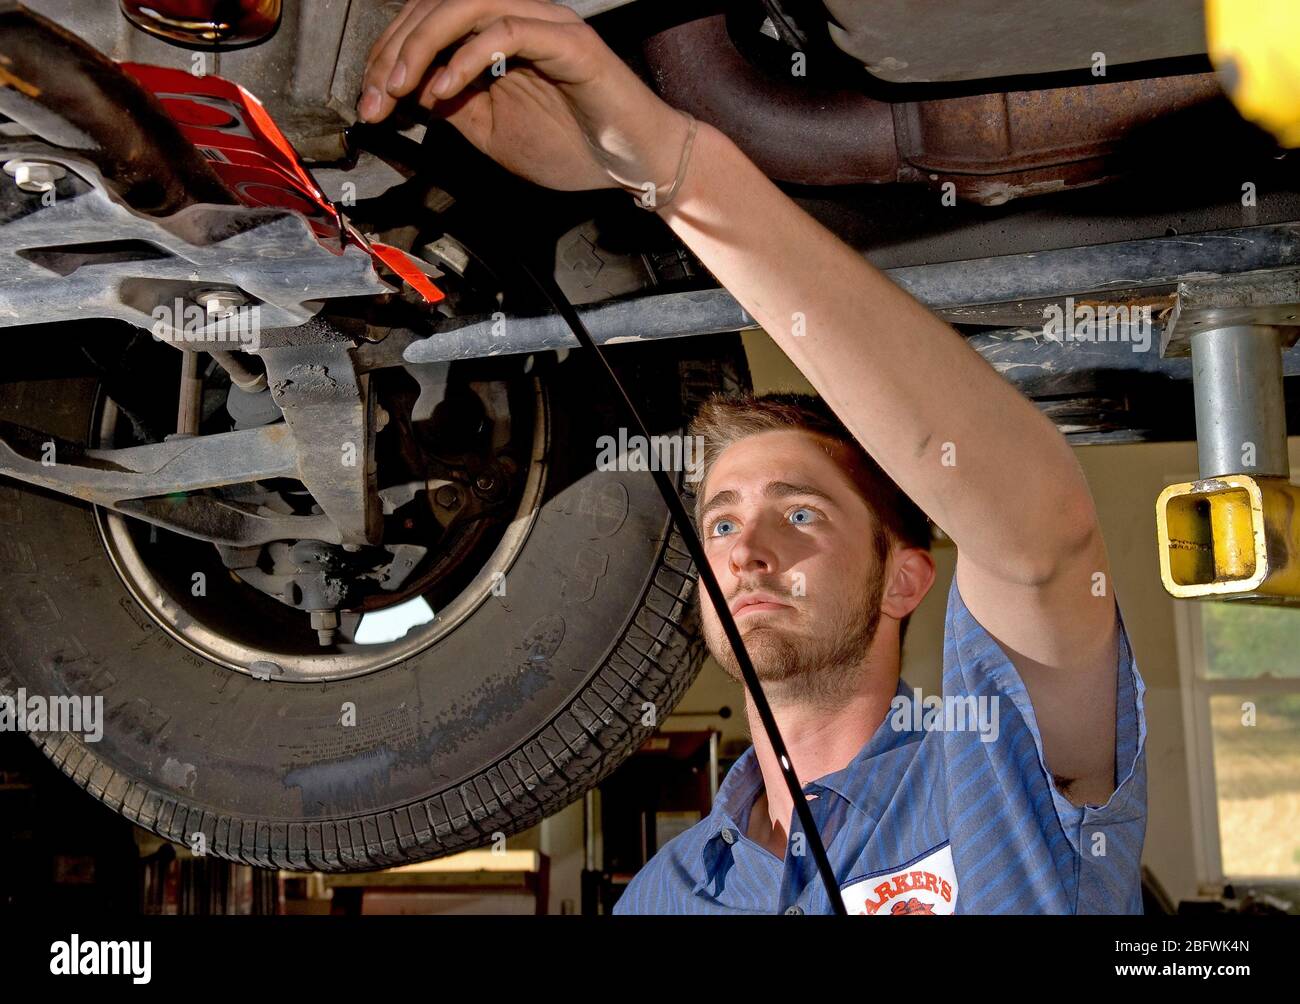 2007 - Mechanic in Maryland providing routine maintainance by draining motor oil from a car during an oil change Stock Photo